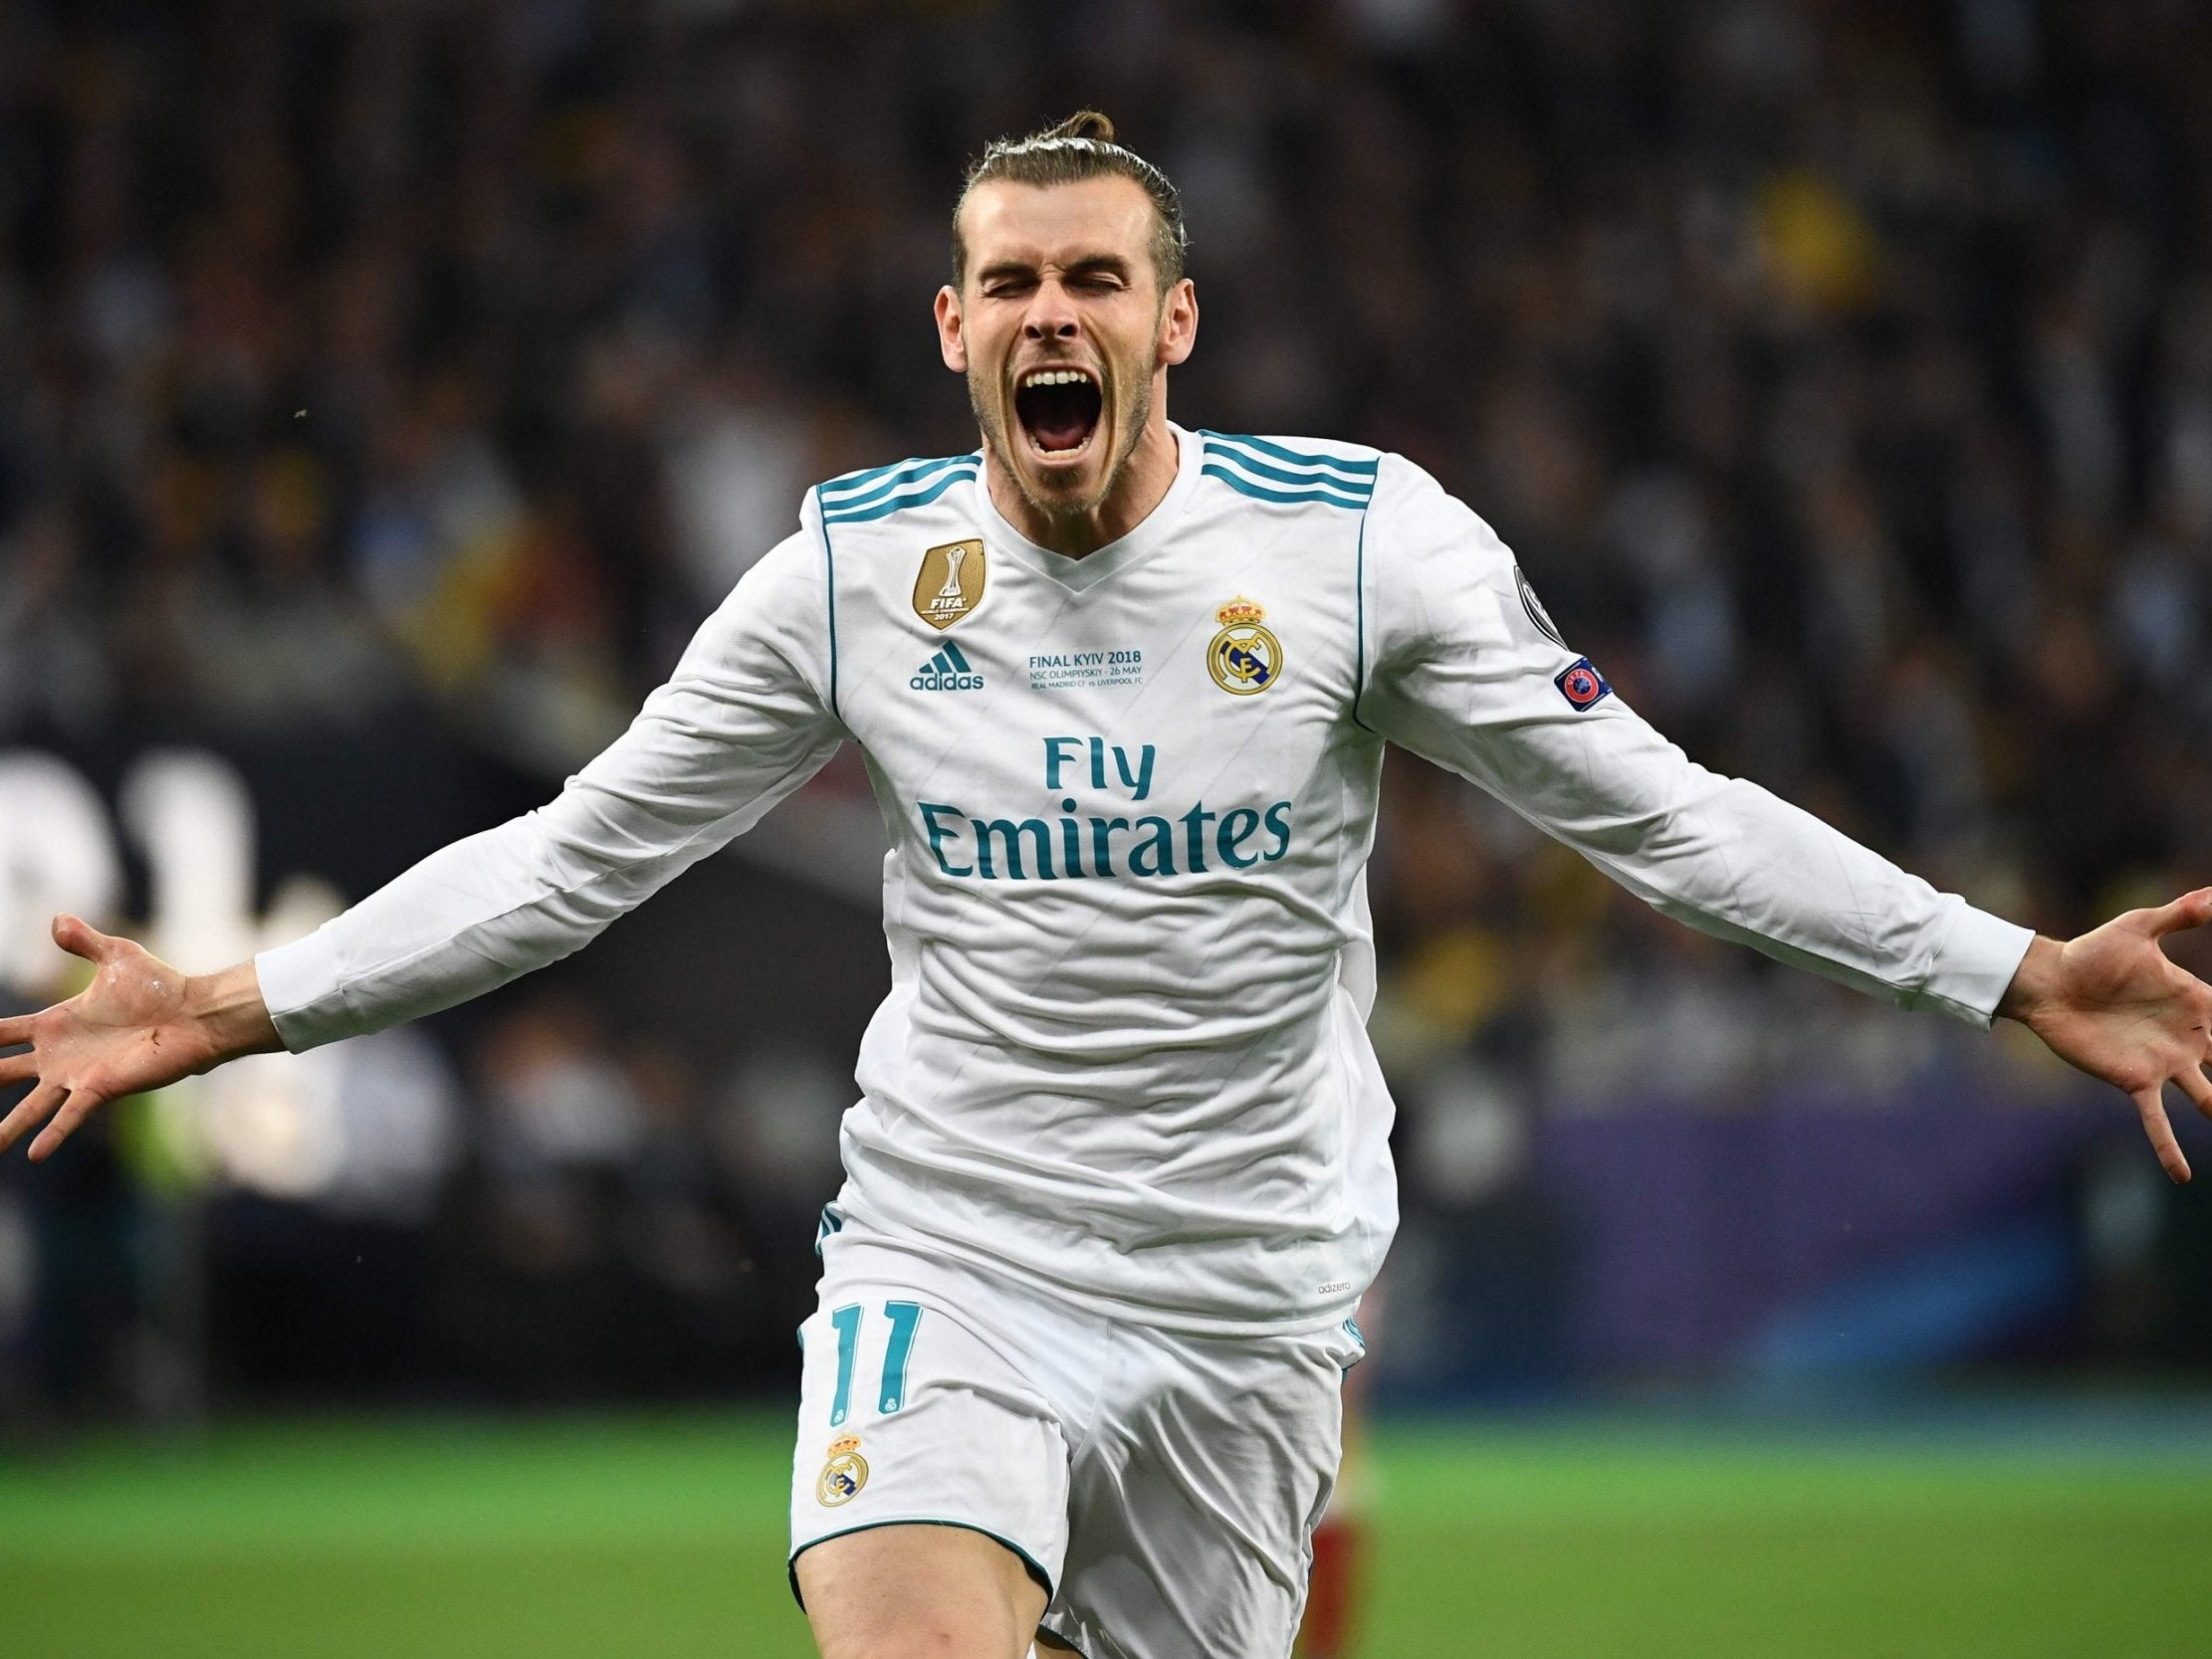 Gareth Bale is set to stay at Real Madrid